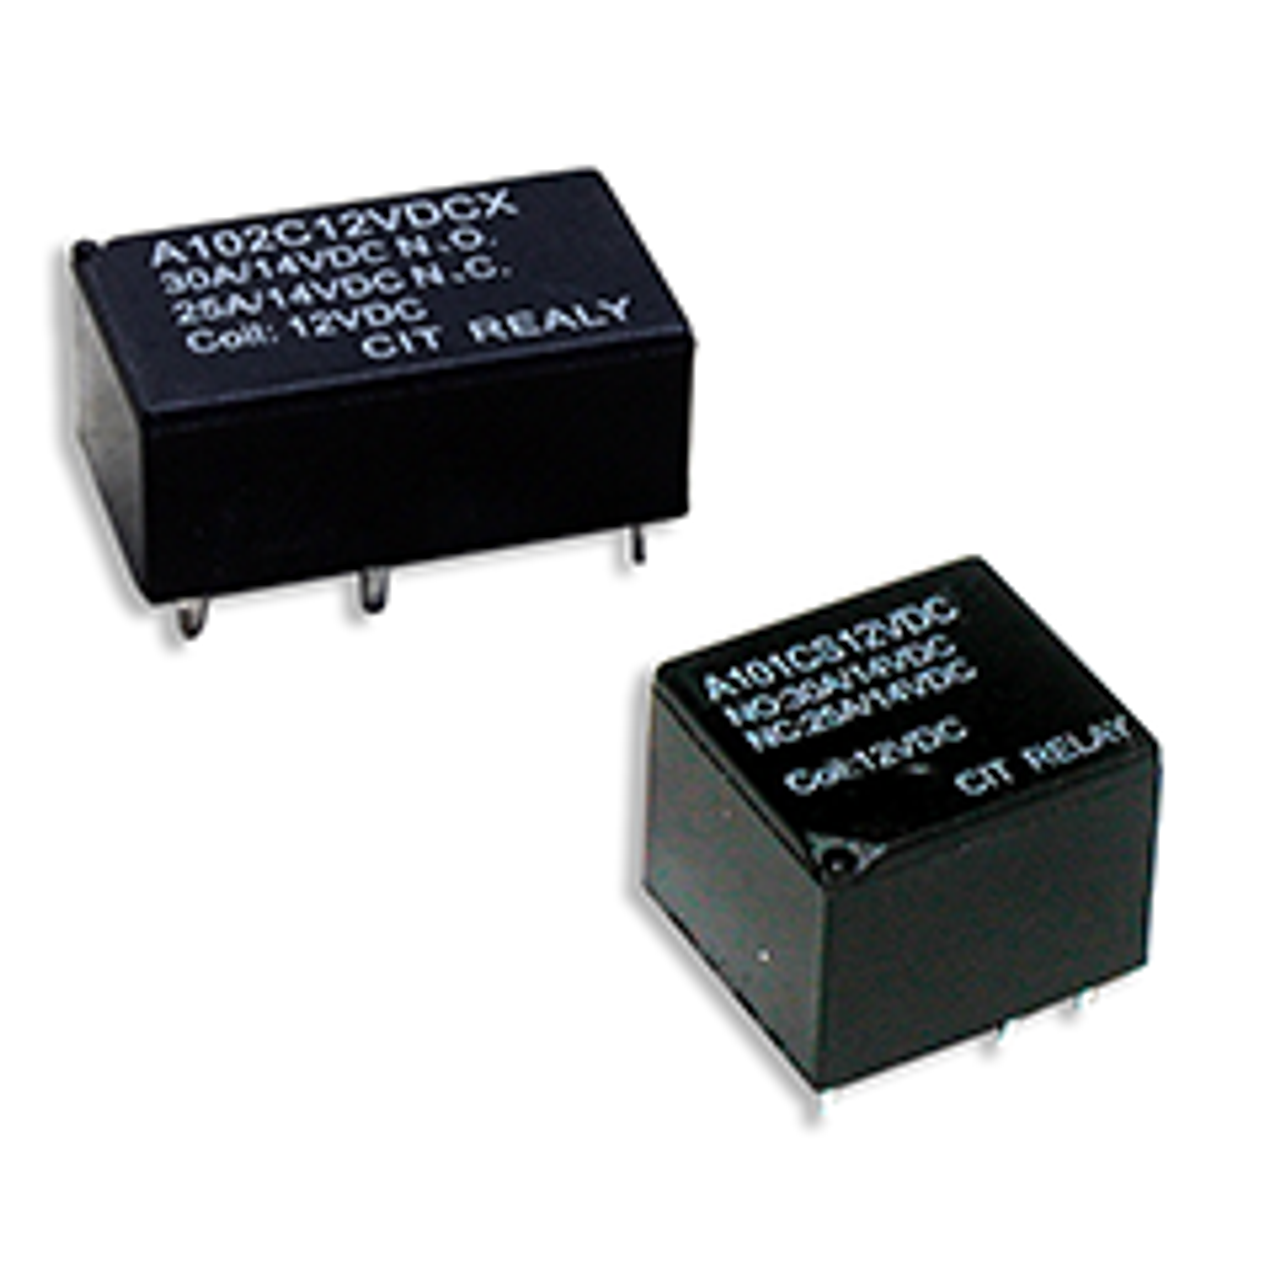 CIT Relay and Switch A101AS12VDC Automotive Relays